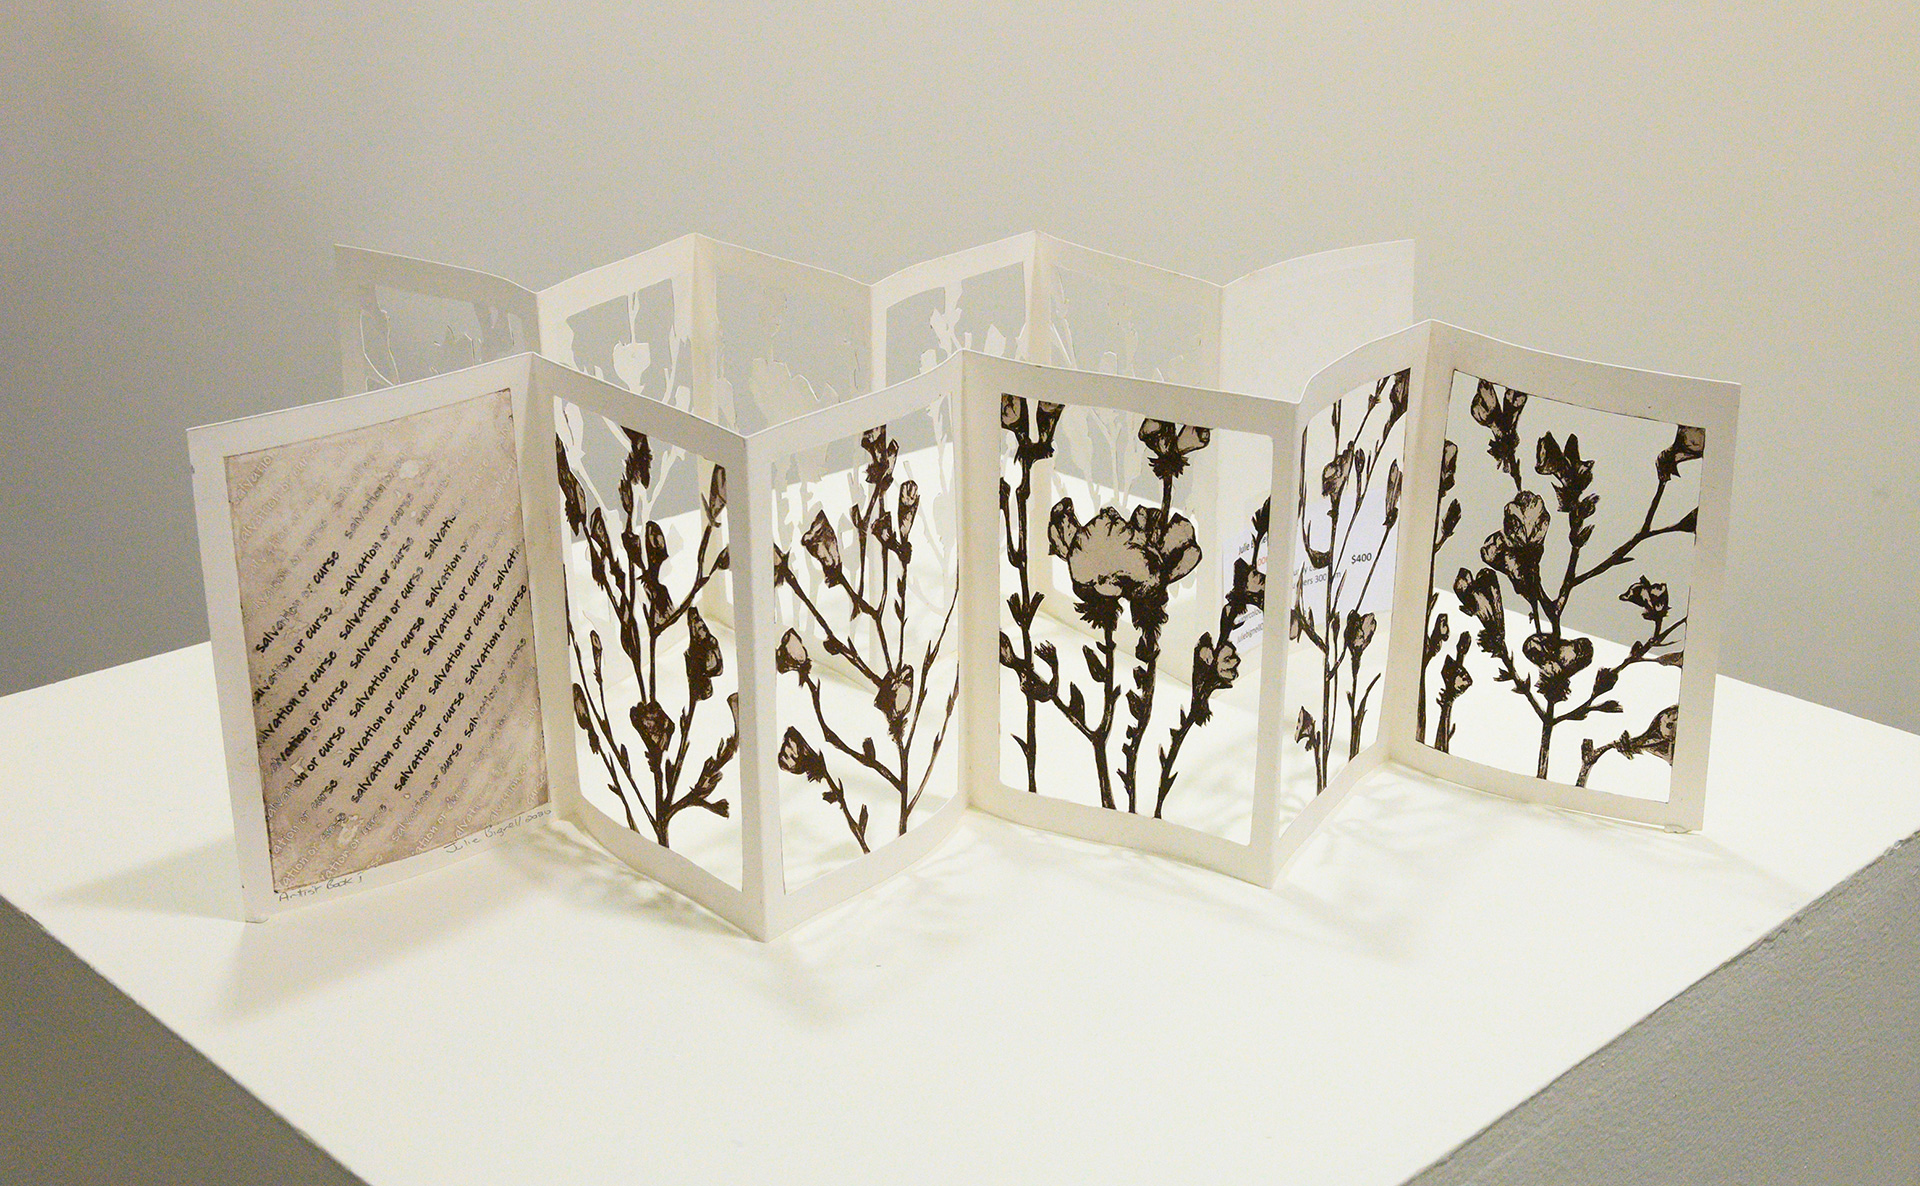 Folded concertina style artist book by Julie Bignell, featuring 5 panels with hand cut b&w flowers and 1 panel with text